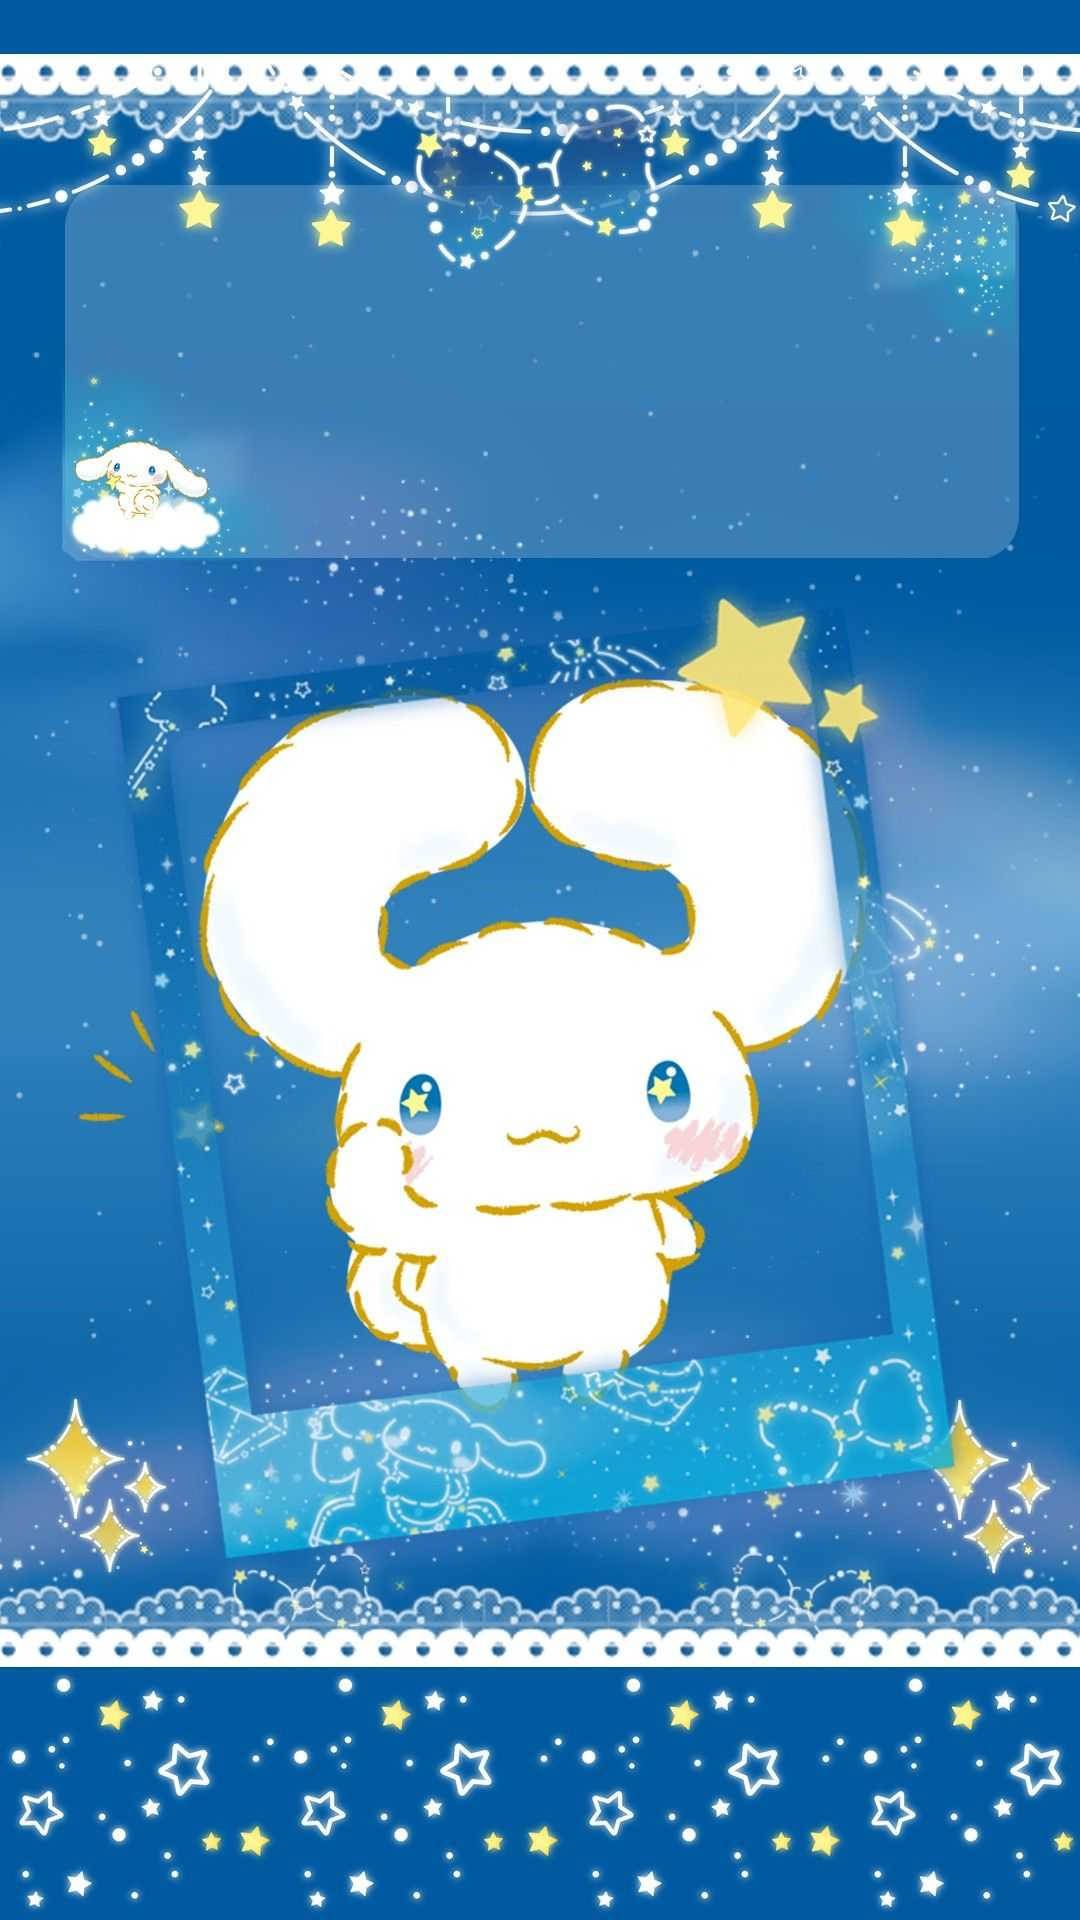 A cute white rabbit with stars on it - Cinnamoroll